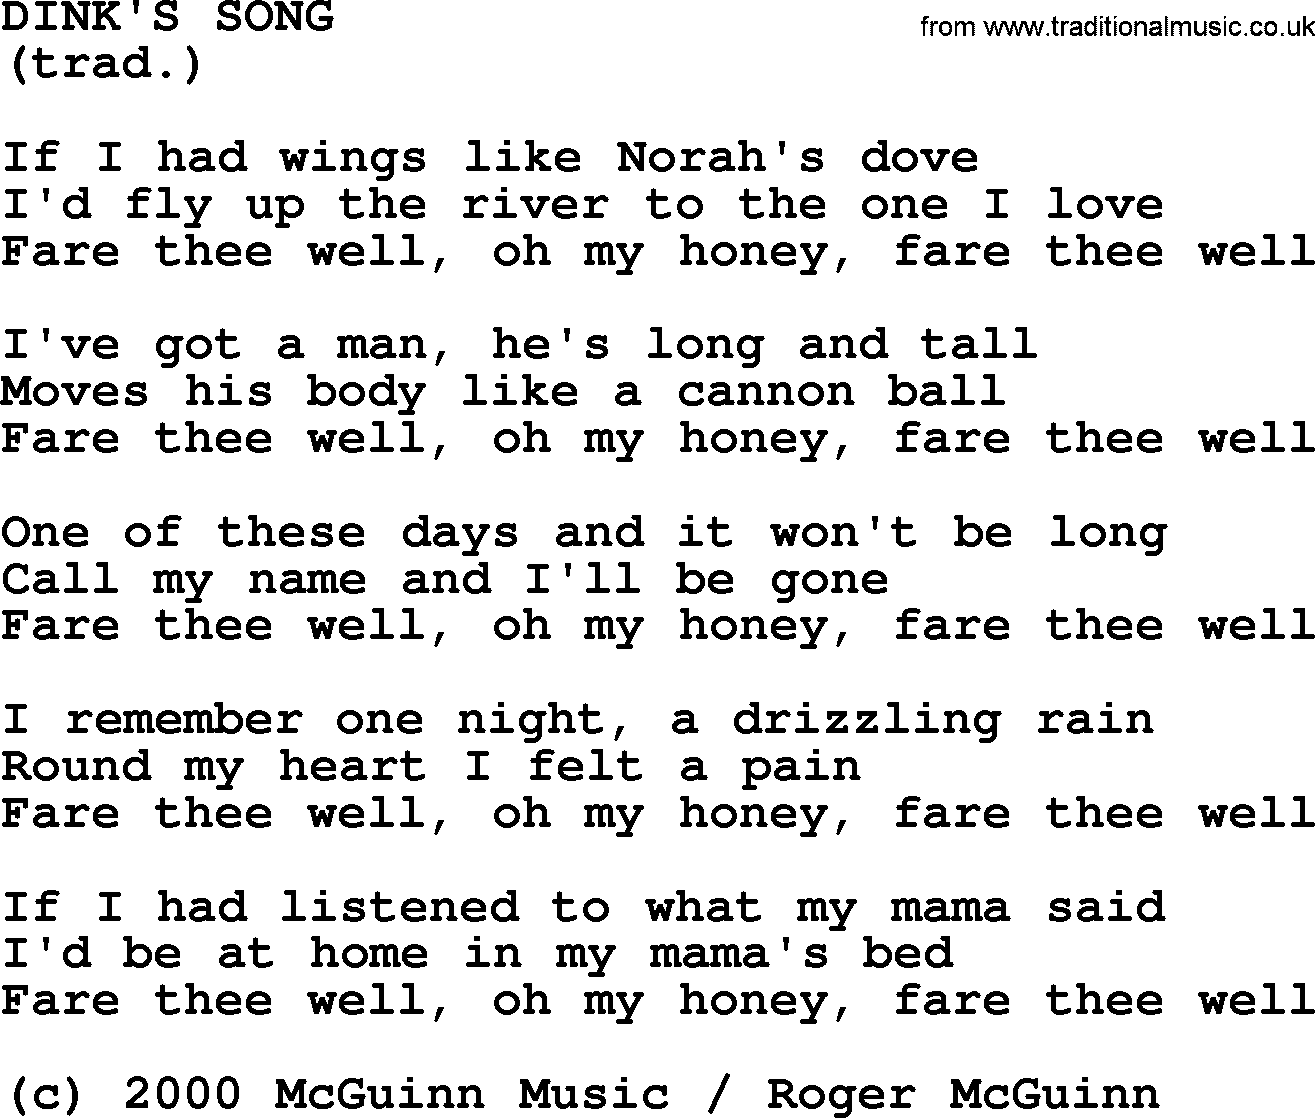 The Byrds song Dink's Song, lyrics